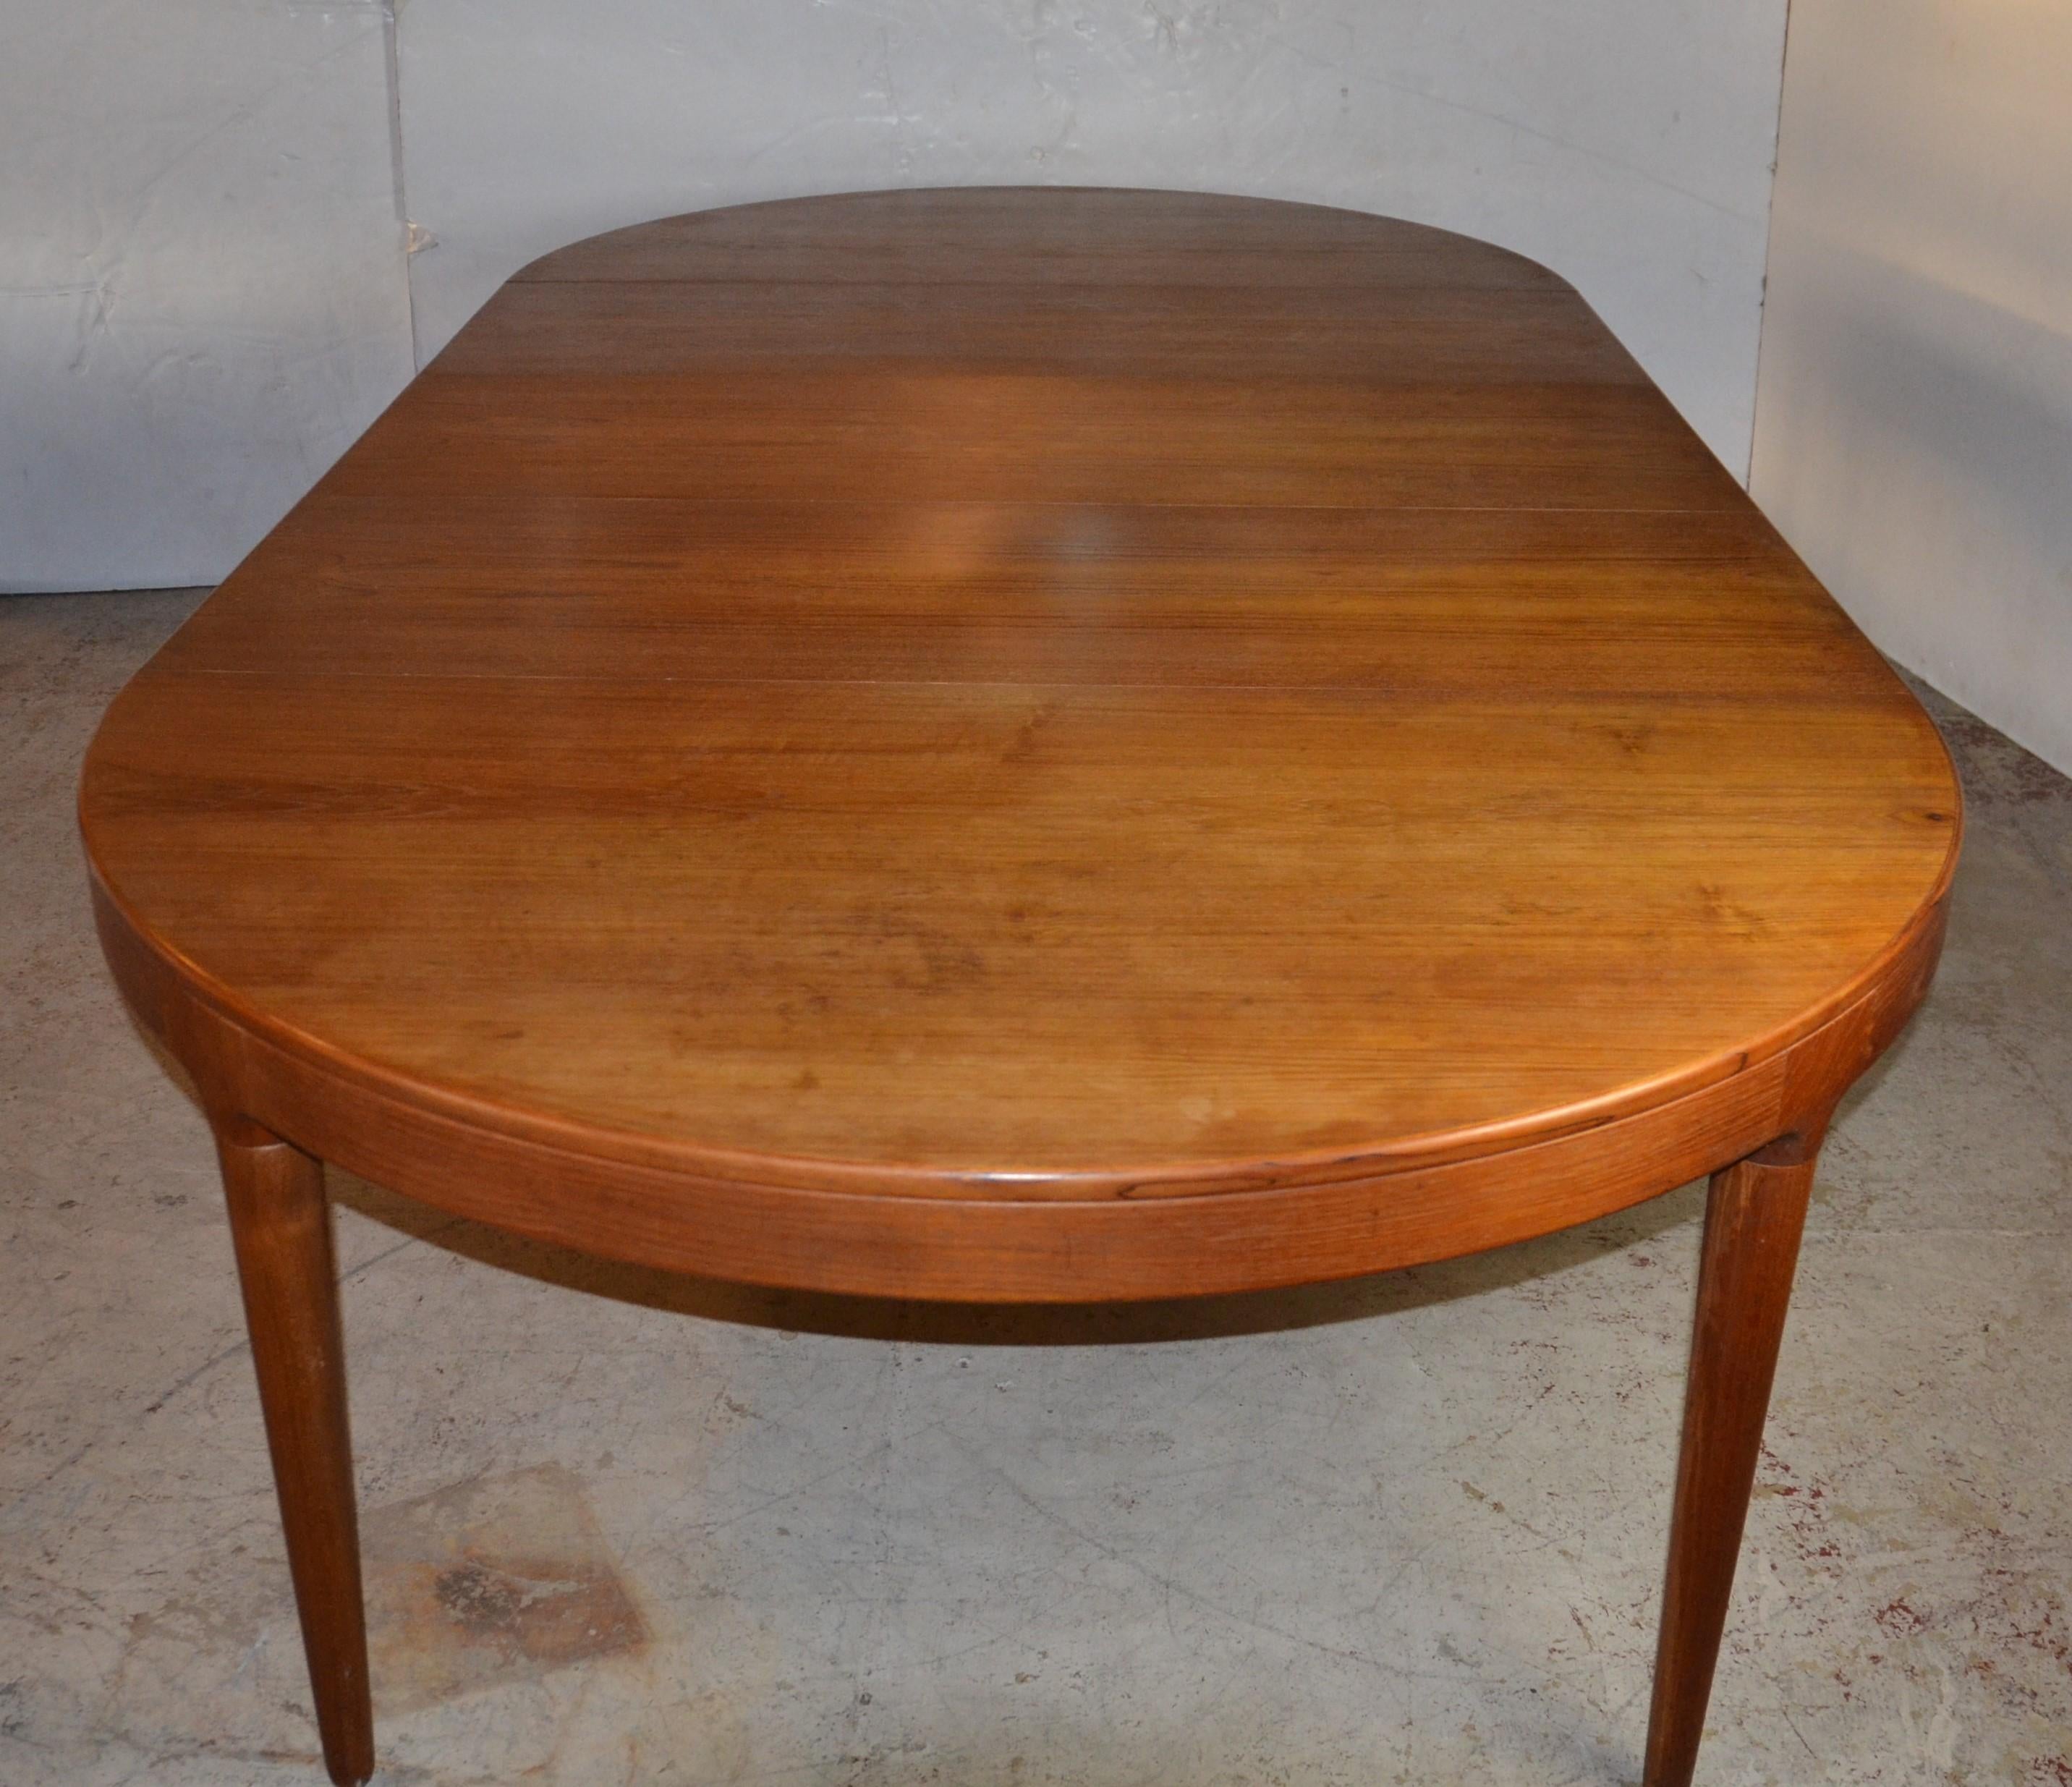 This oval-shaped teak table has three leaves extent to 118